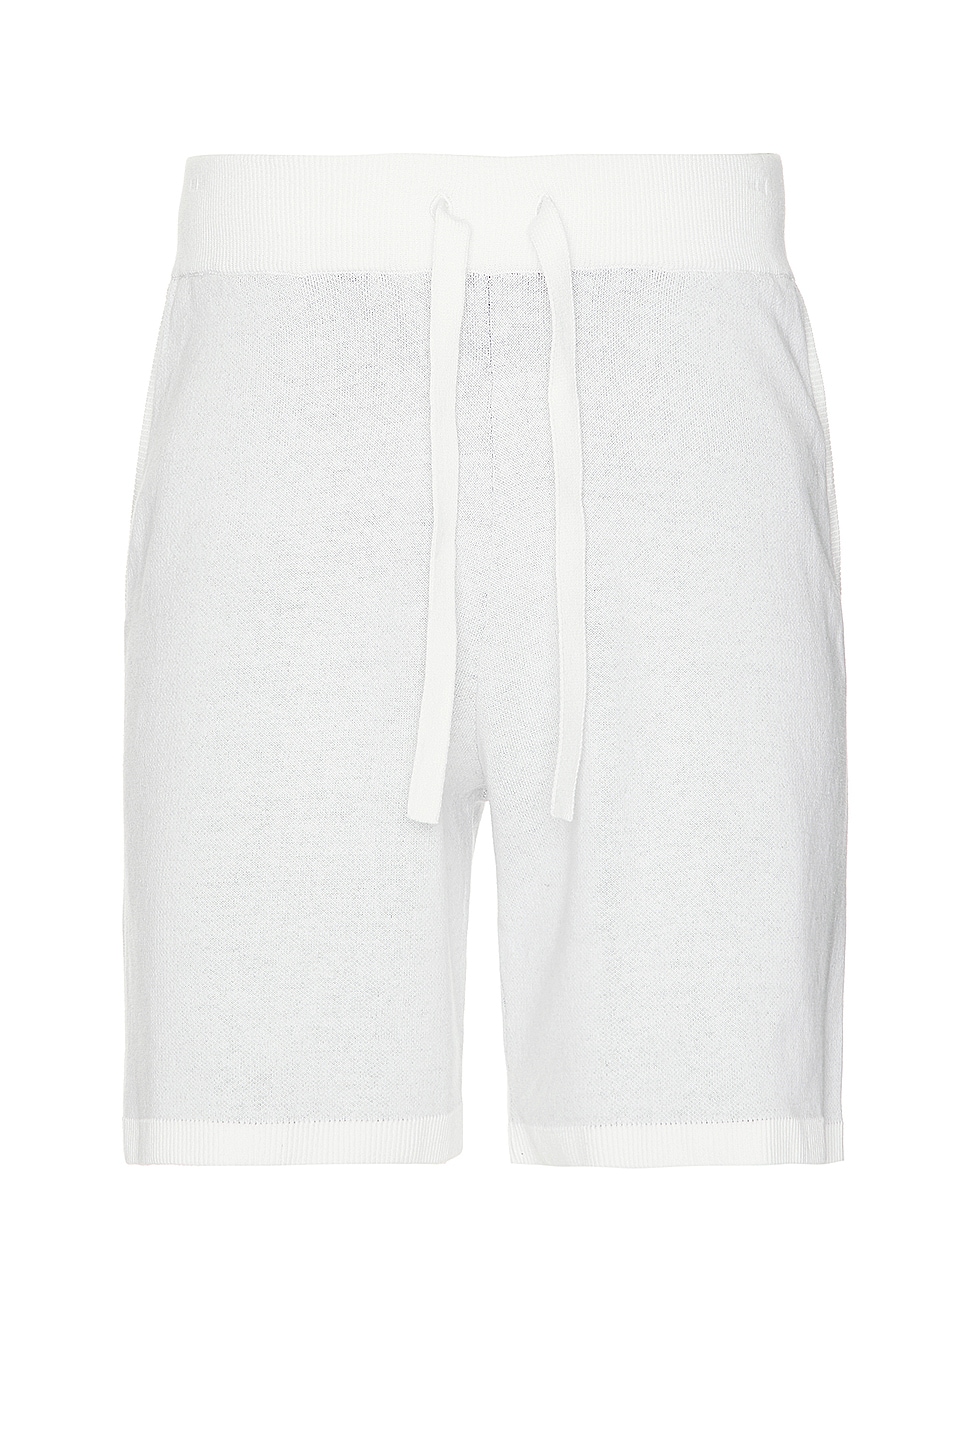 Image 1 of WAO Fully Knitted Short in White